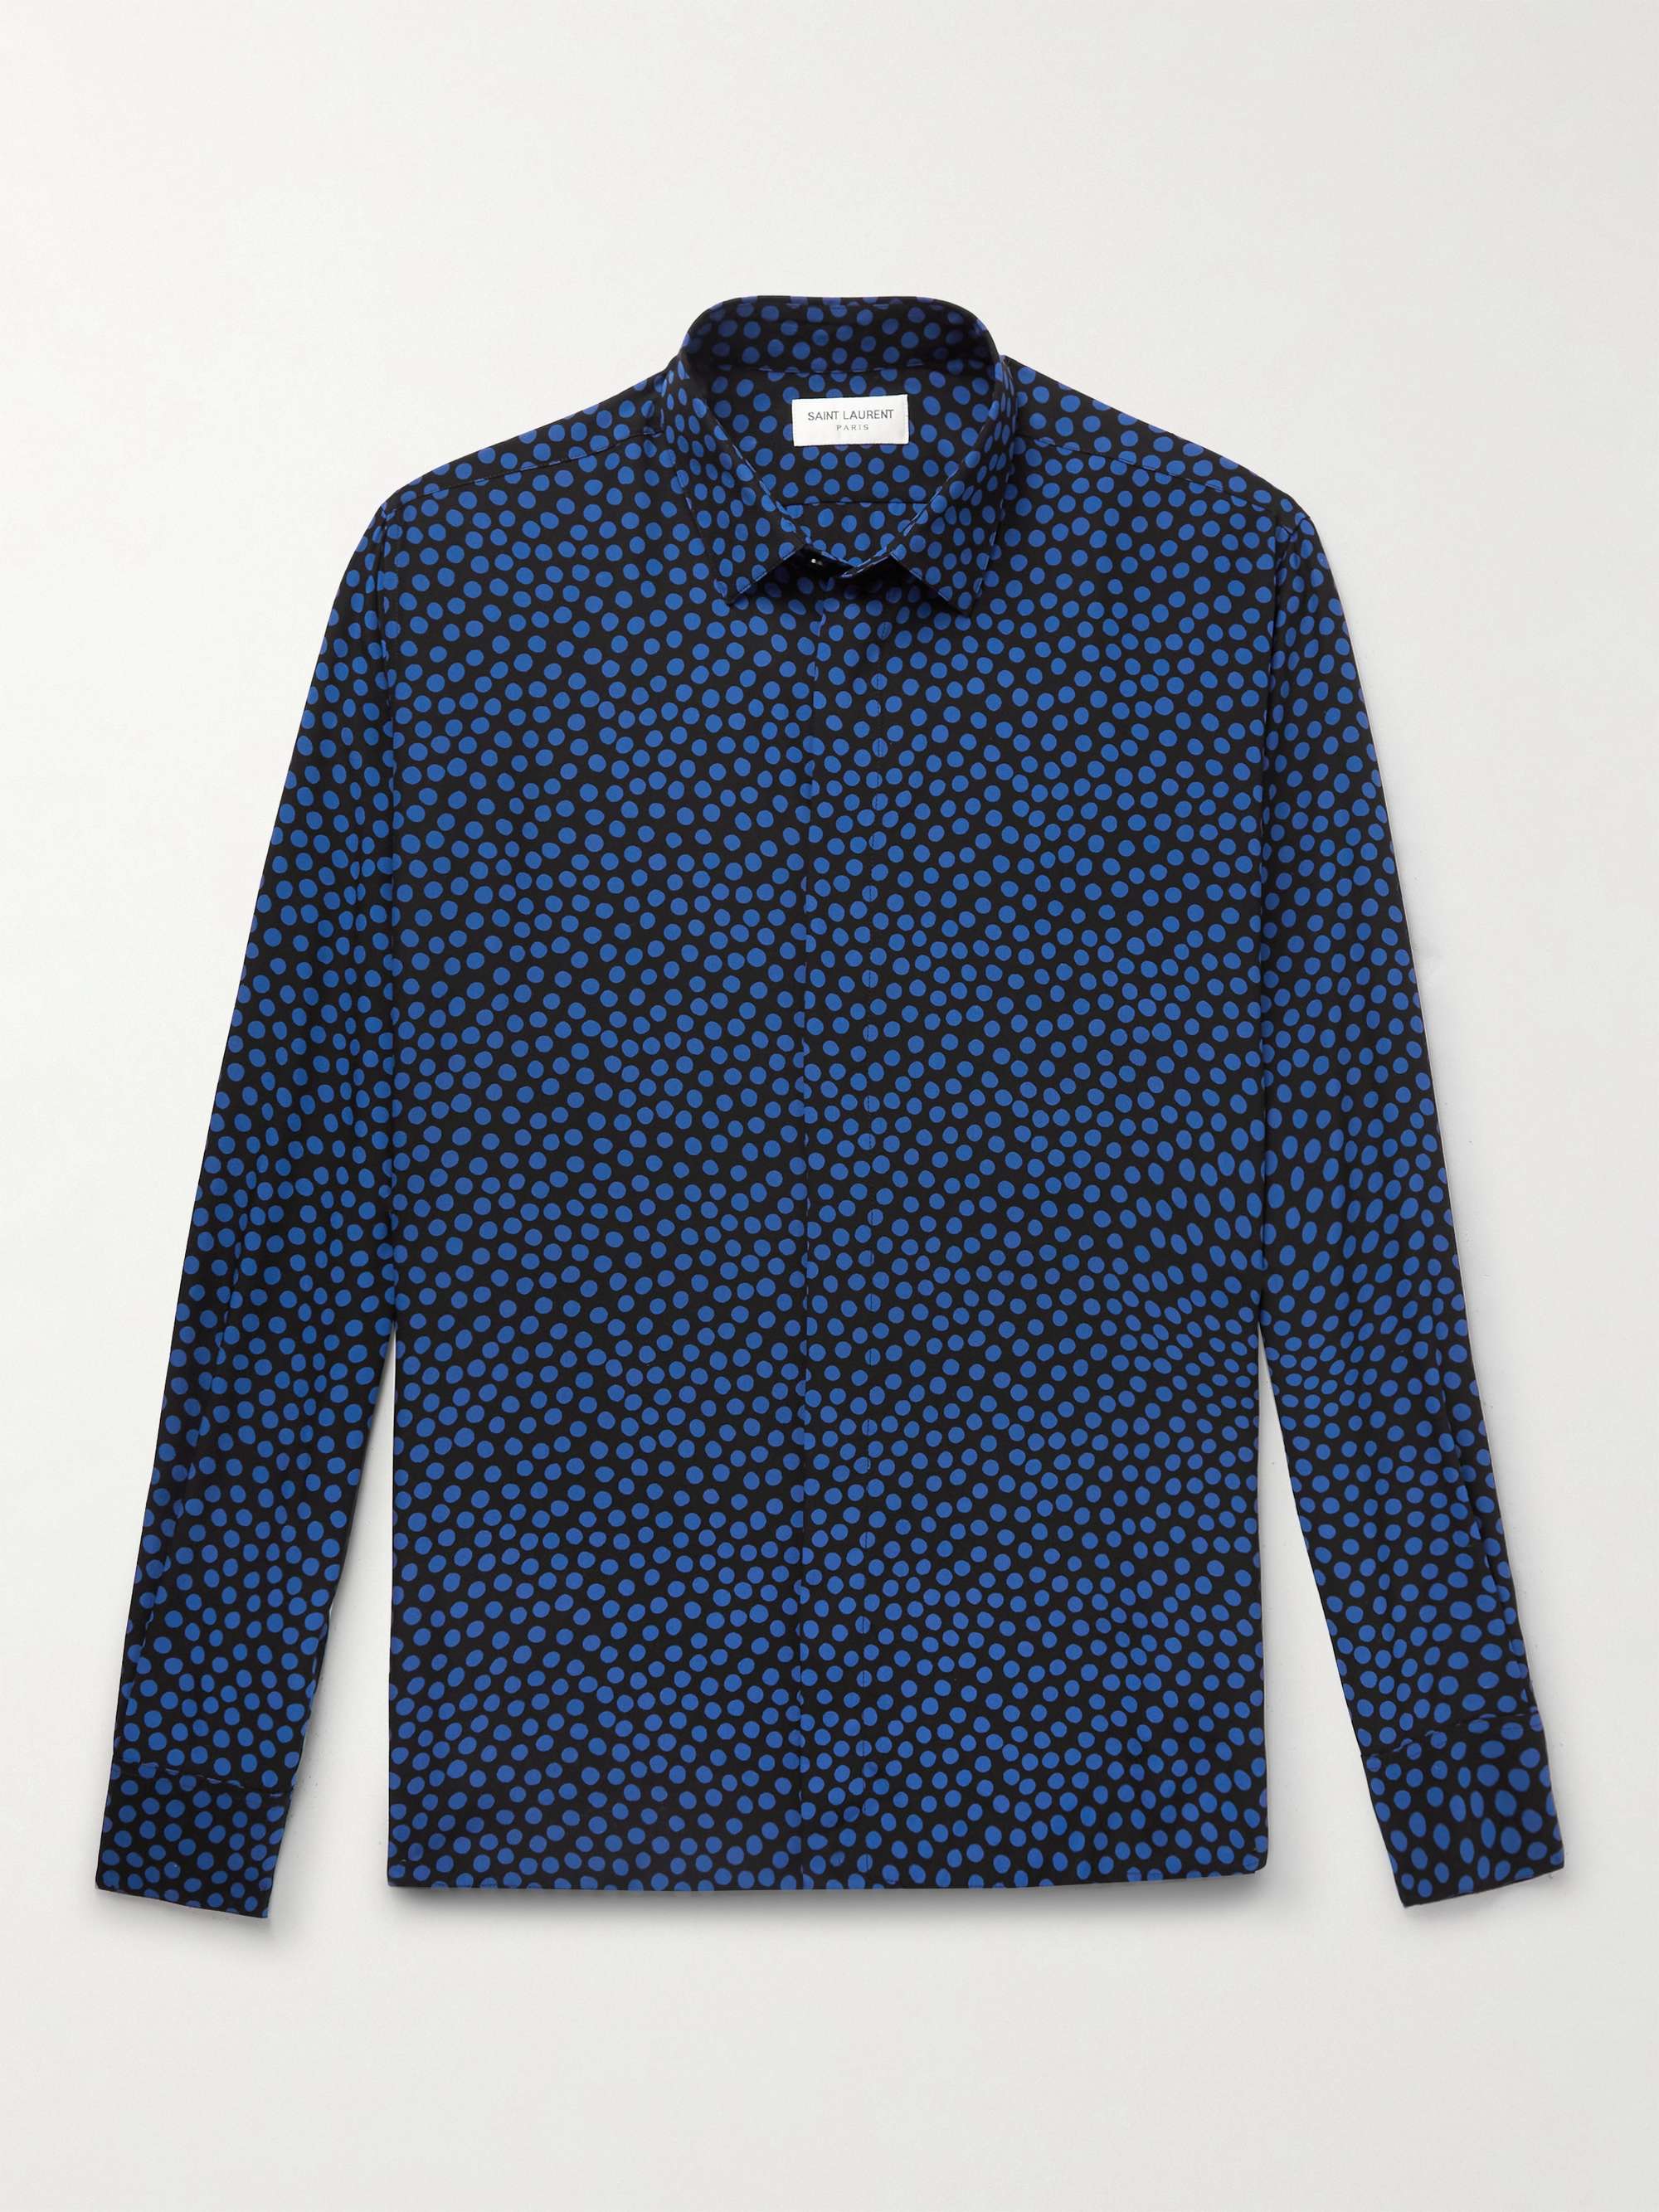 Gucci ' Loves You' Print Silk Shirt in Blue for Men